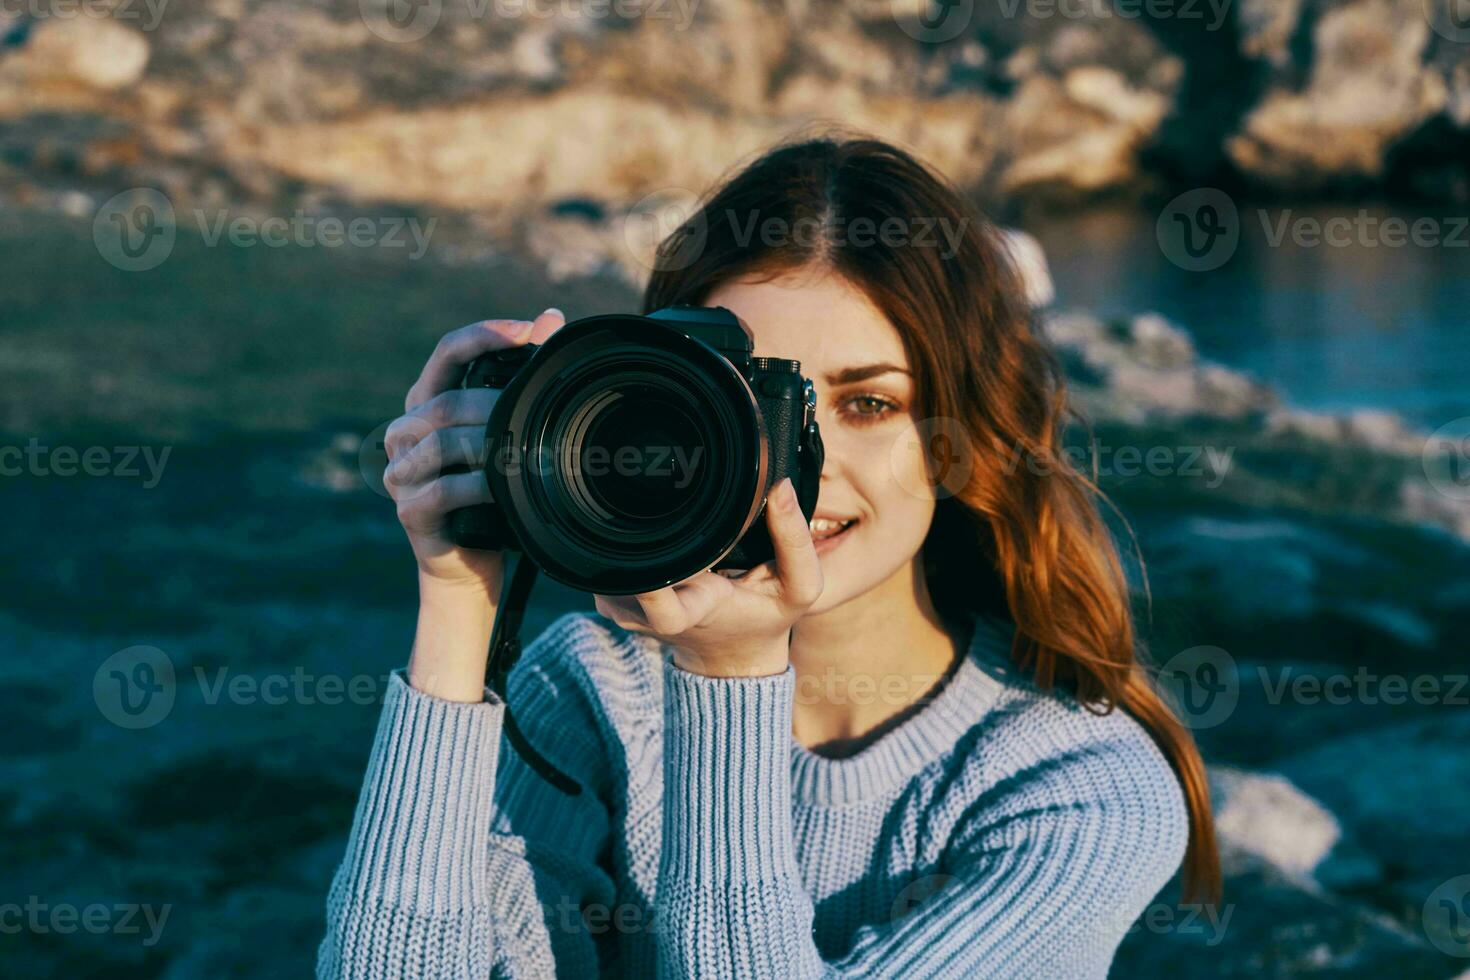 red-haired woman photographer nature rocky mountains professional photo